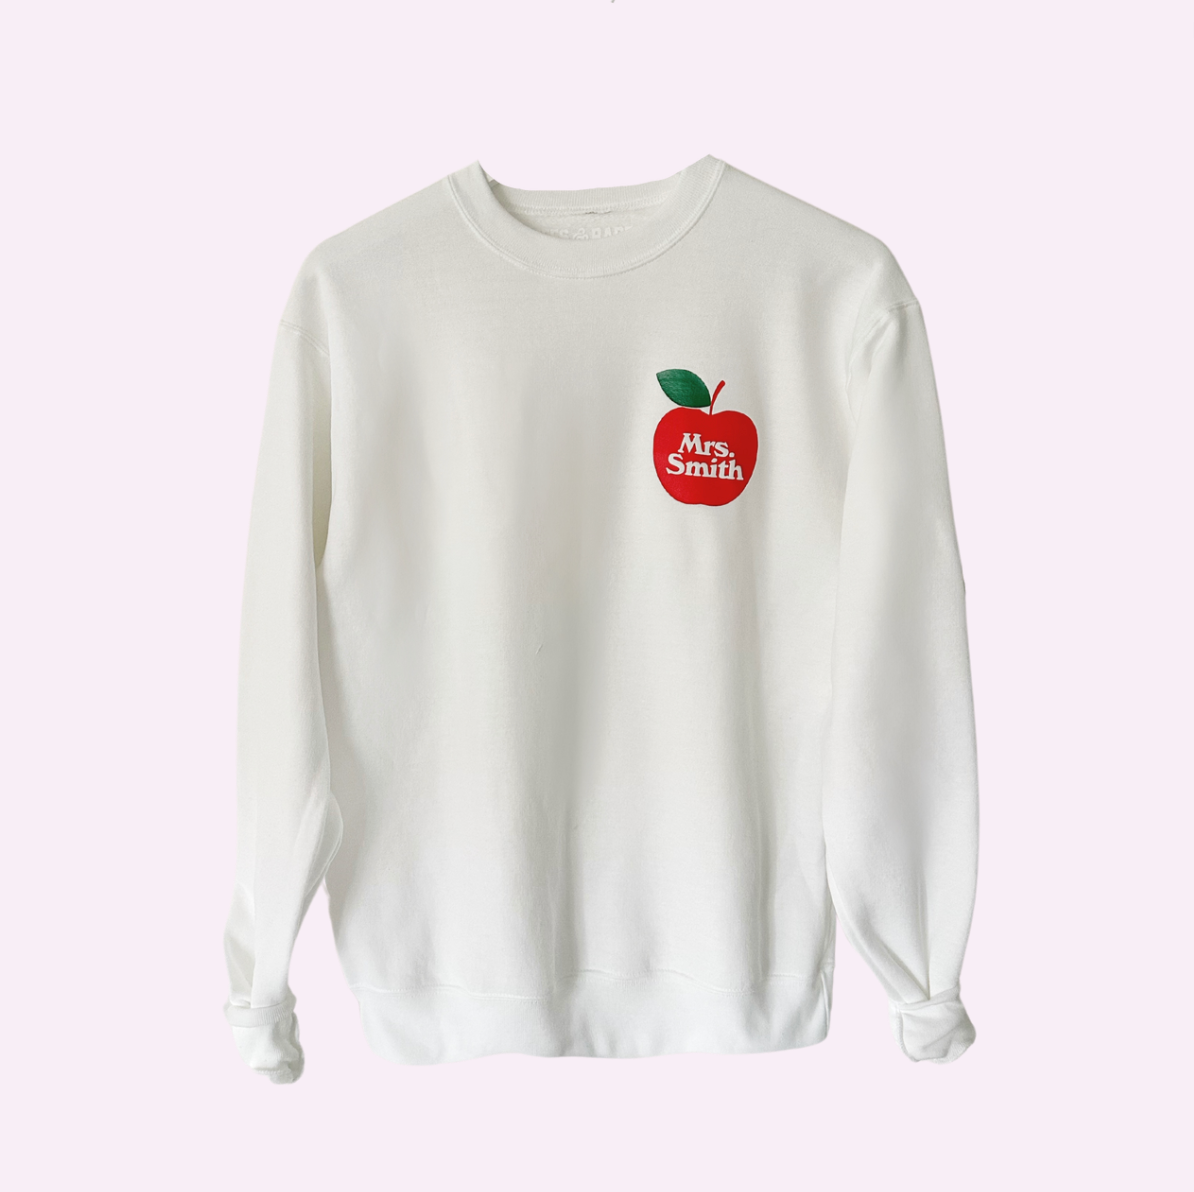 APPLE U MOST ♡ white adult sweatshirt with personalized heart